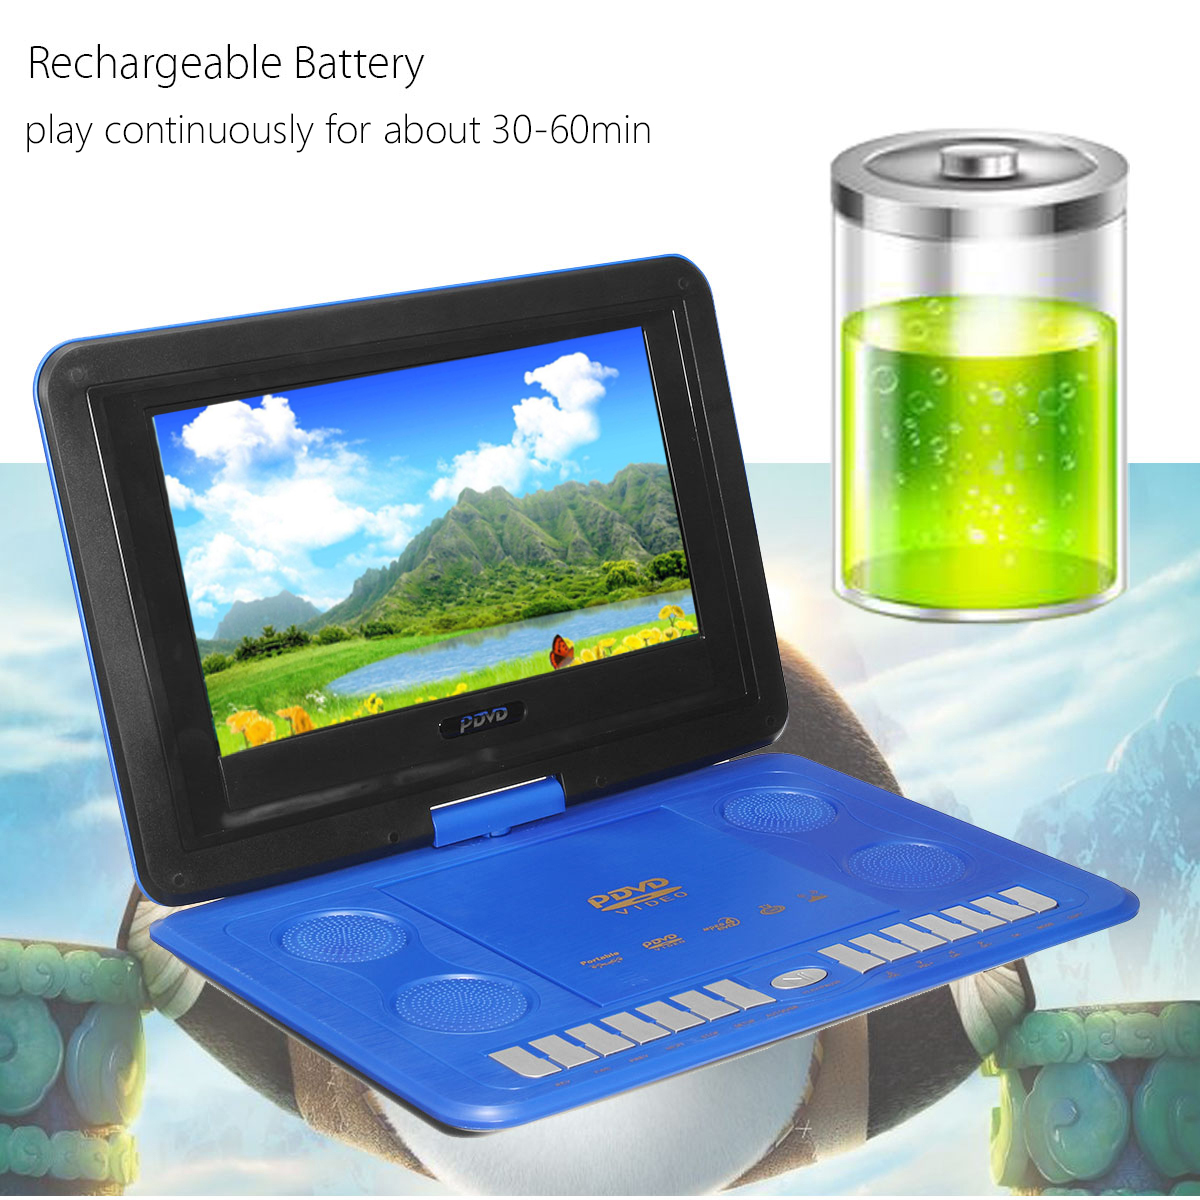 138-Inch-Portable-Television-DVD-VCD-EVD-CD-Player-EVD-TV-USB-Game-270deg-Rotation-LCD-Screen-with-R-1934262-2